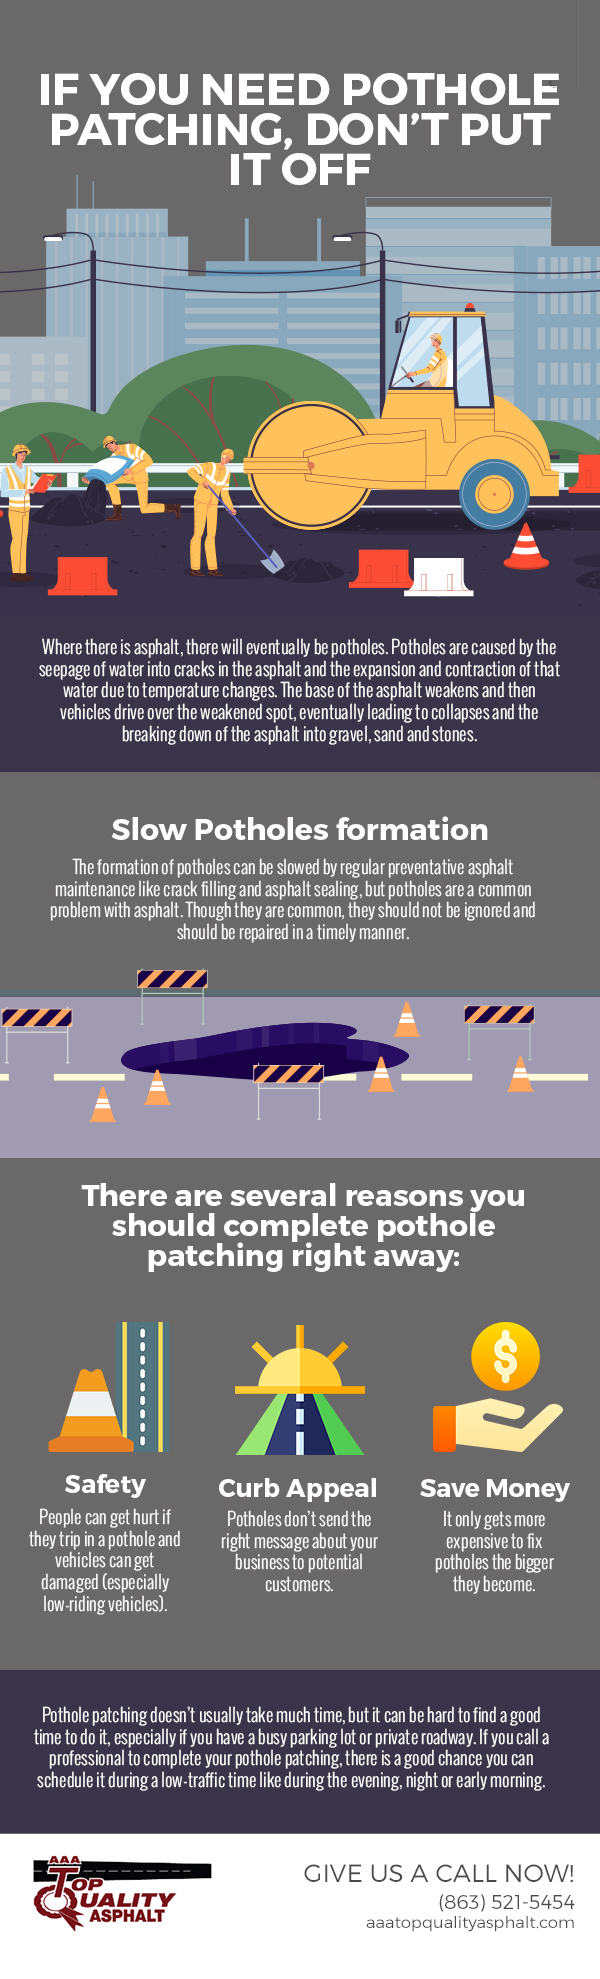 If You Need Pothole Patching, Don’t Put it Off [infographic]